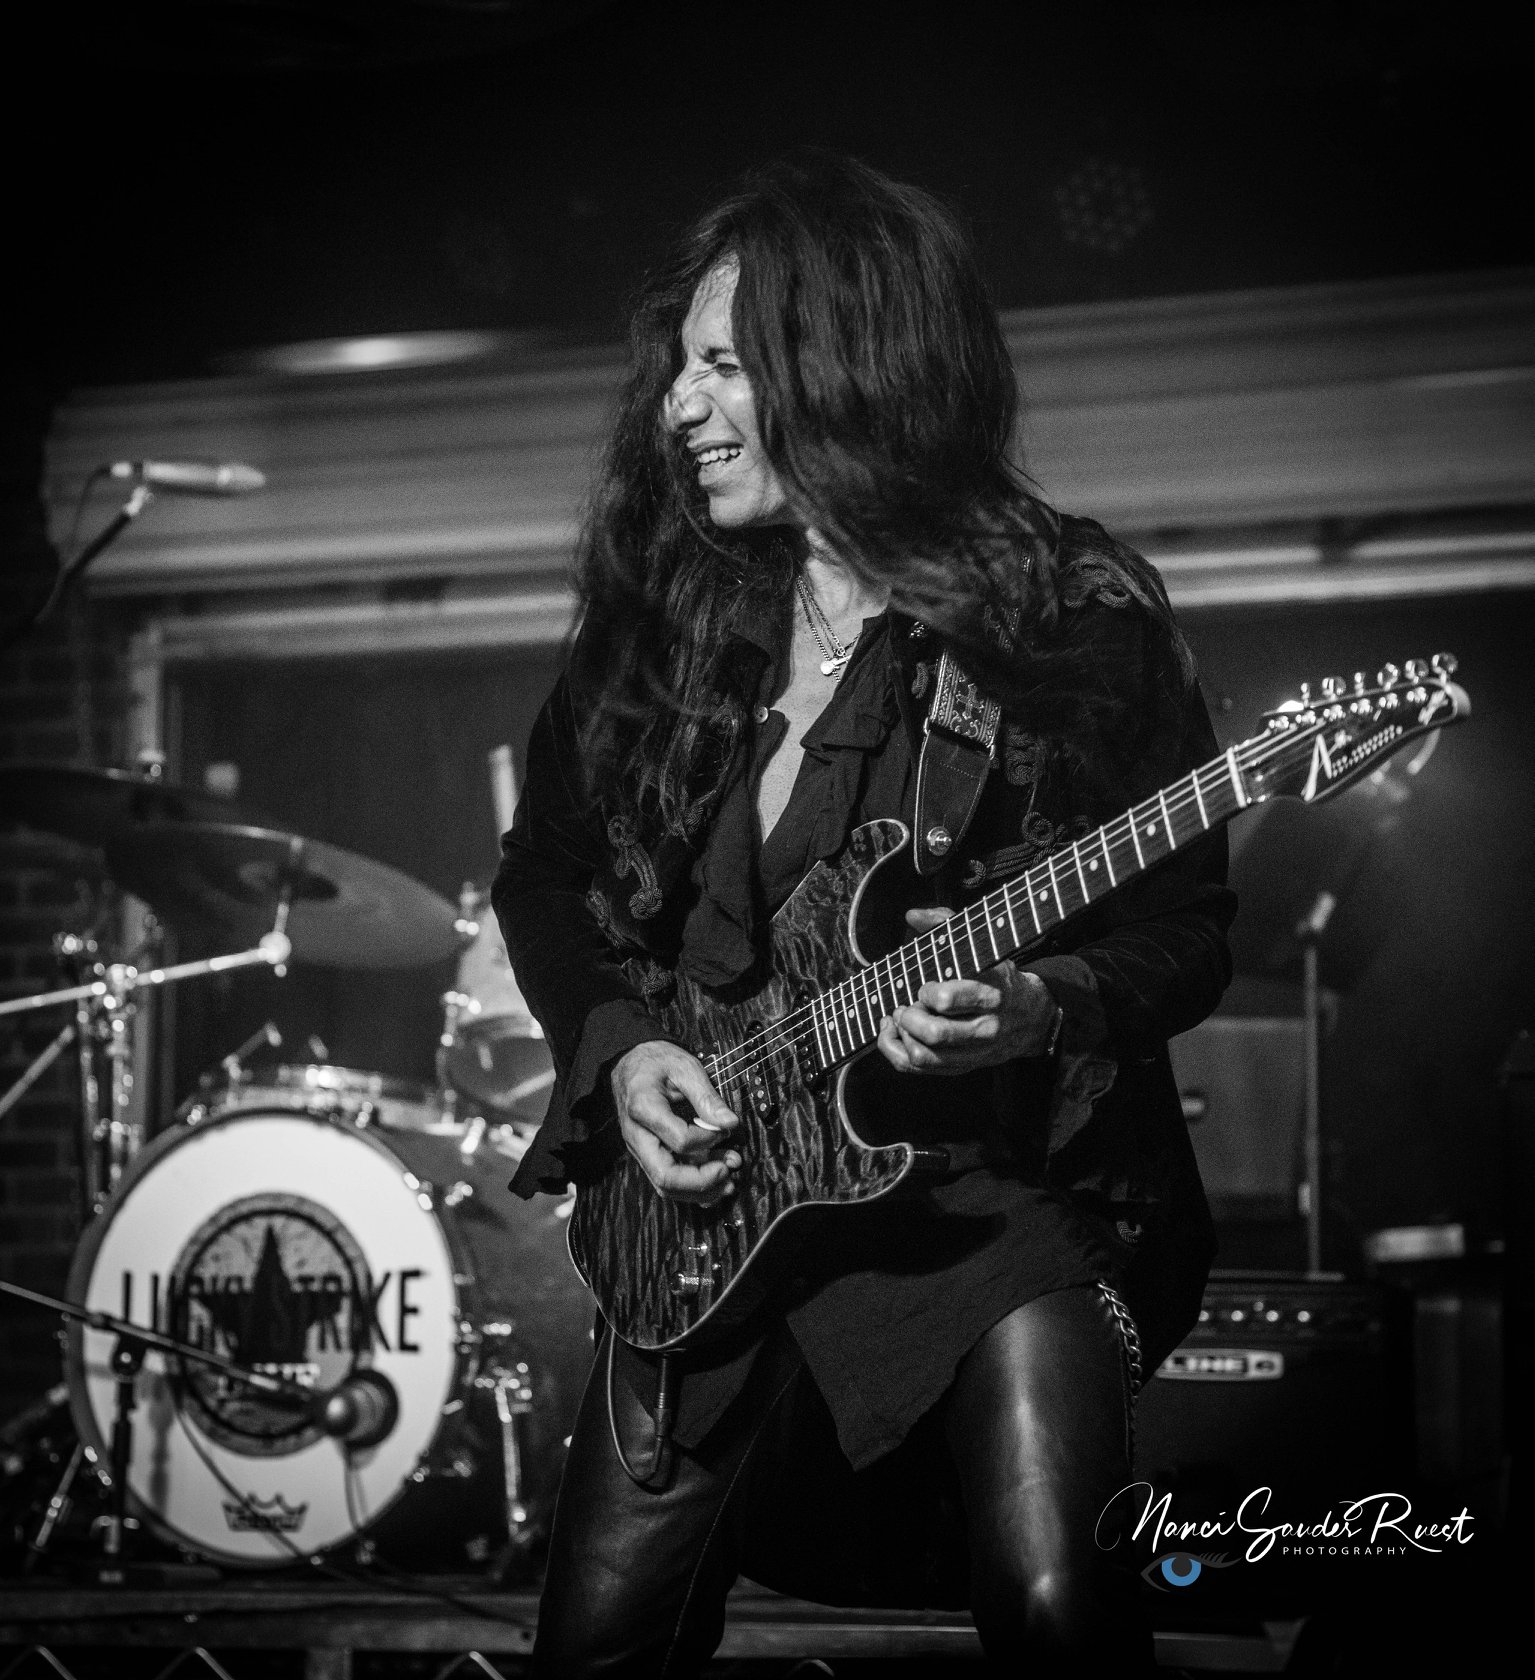 Mike Campese Soundcheck Live Pic 19, by Nanci Sauder Ruest.